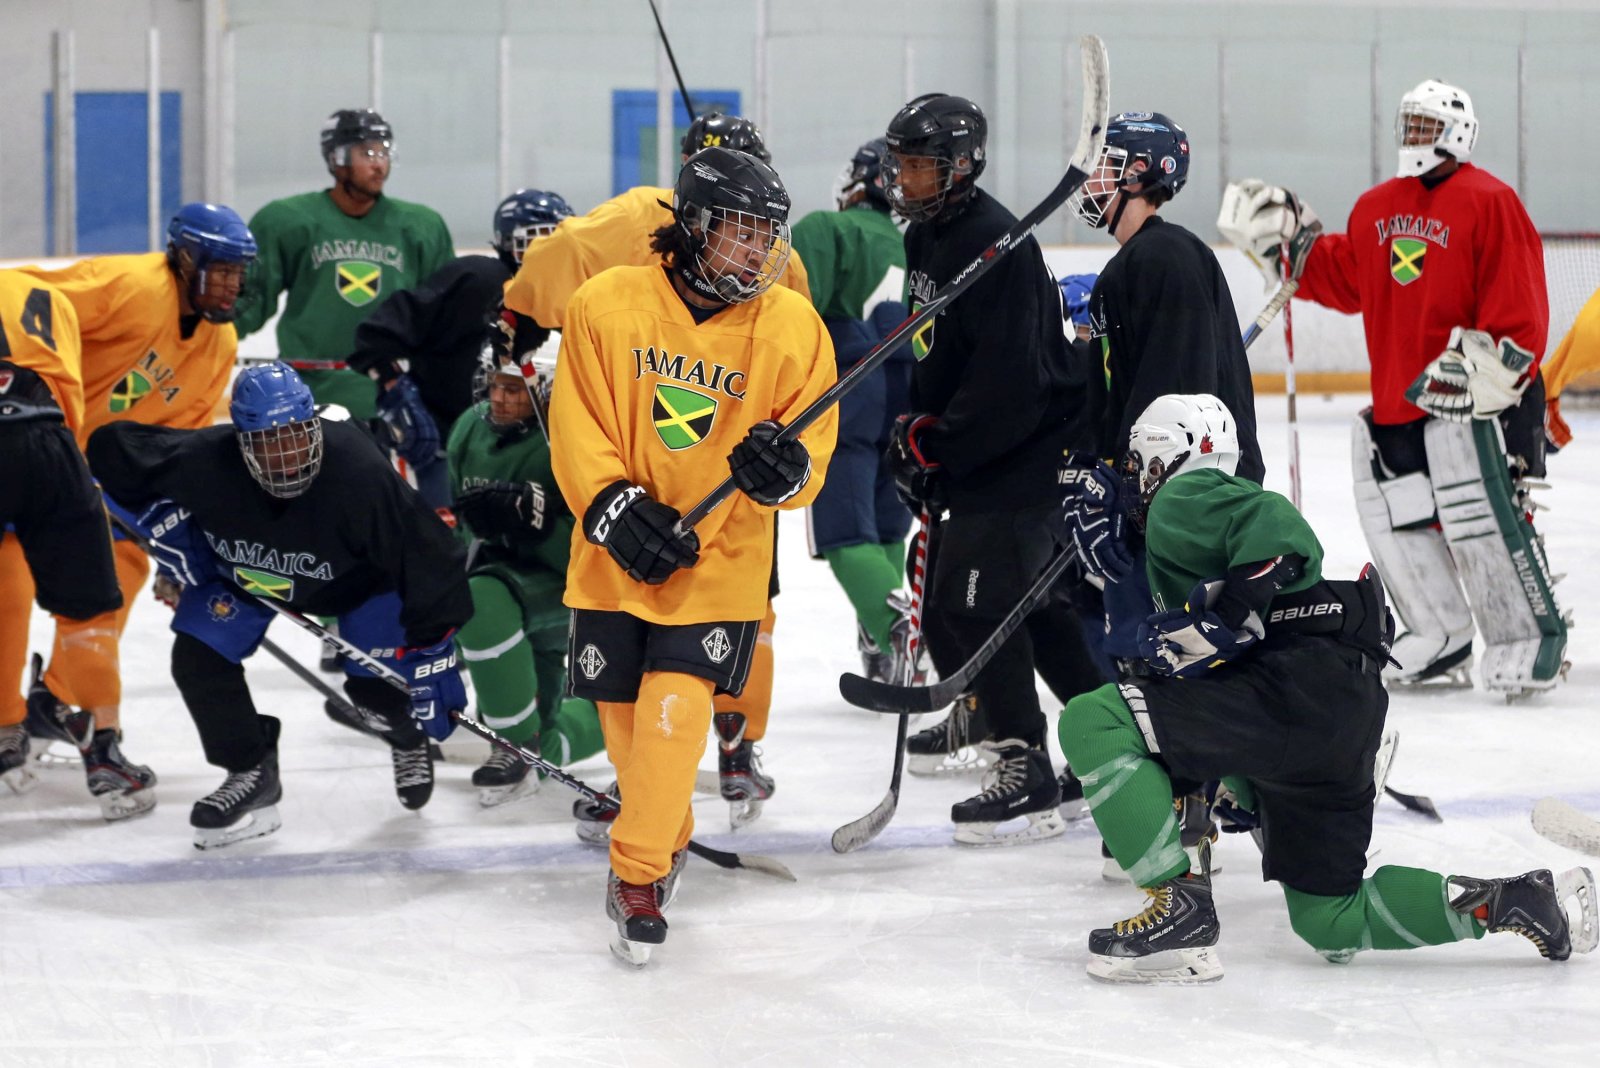 Jamaican Ice Hockey Team Wins All Their Exhibition Games at the